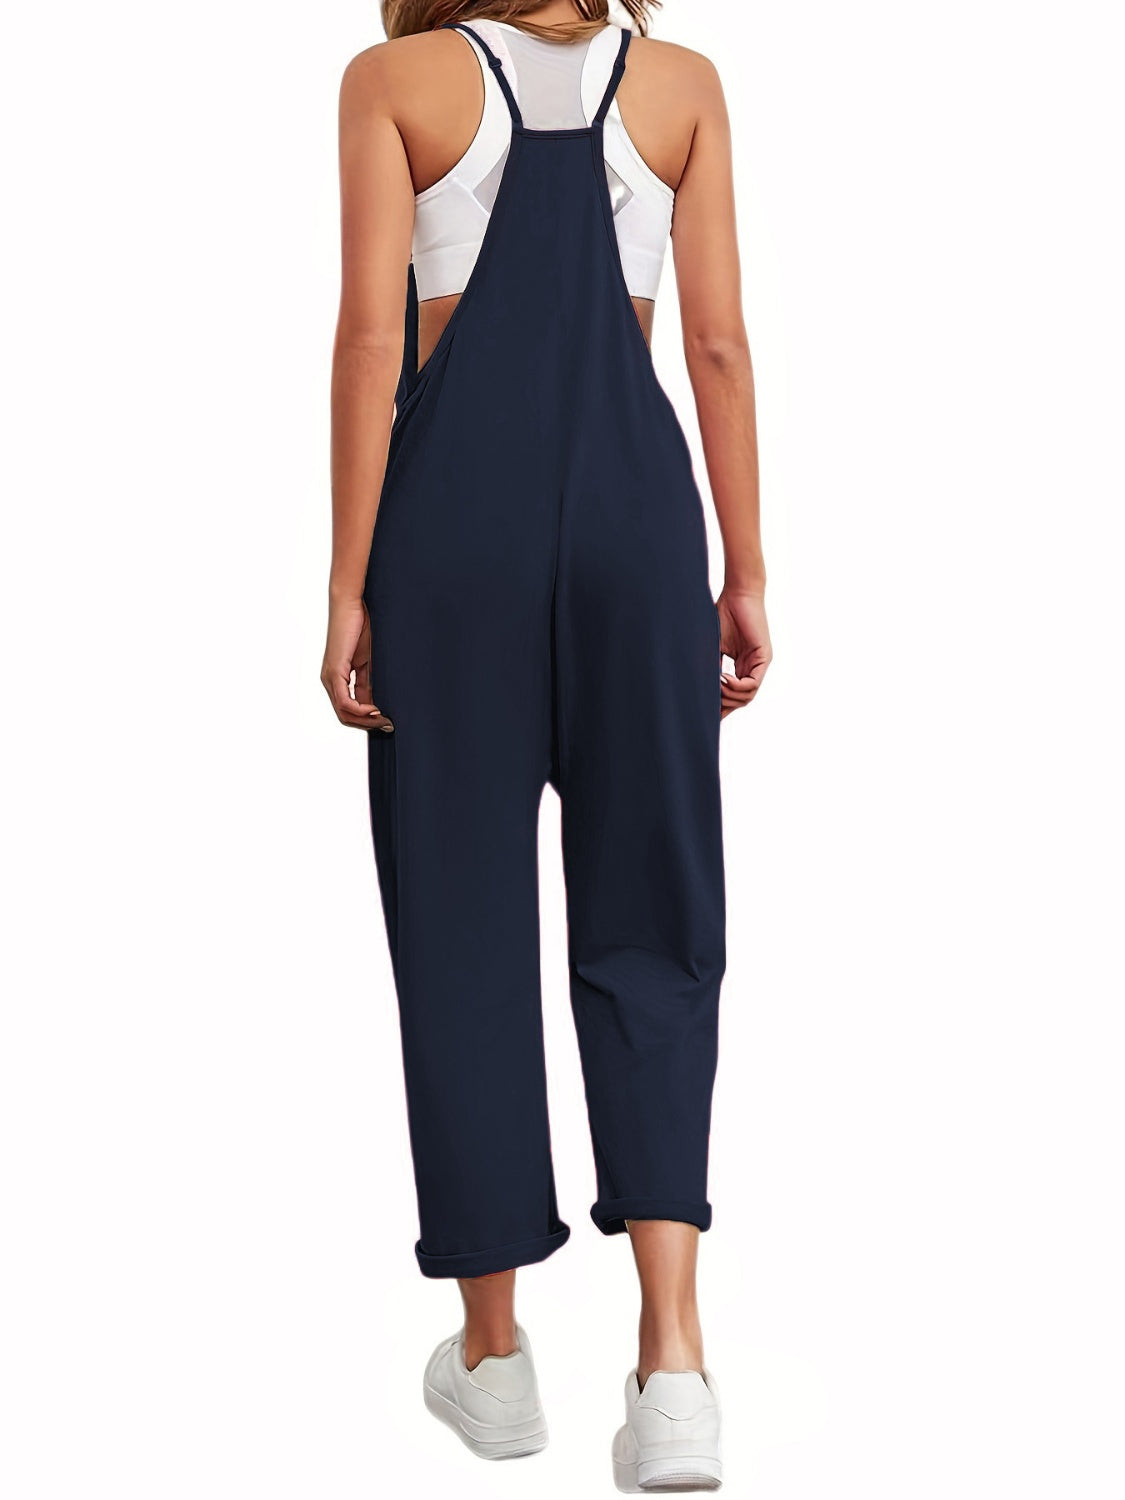 Full Size Spaghetti Strap Straight Leg Jumpsuit with Pockets